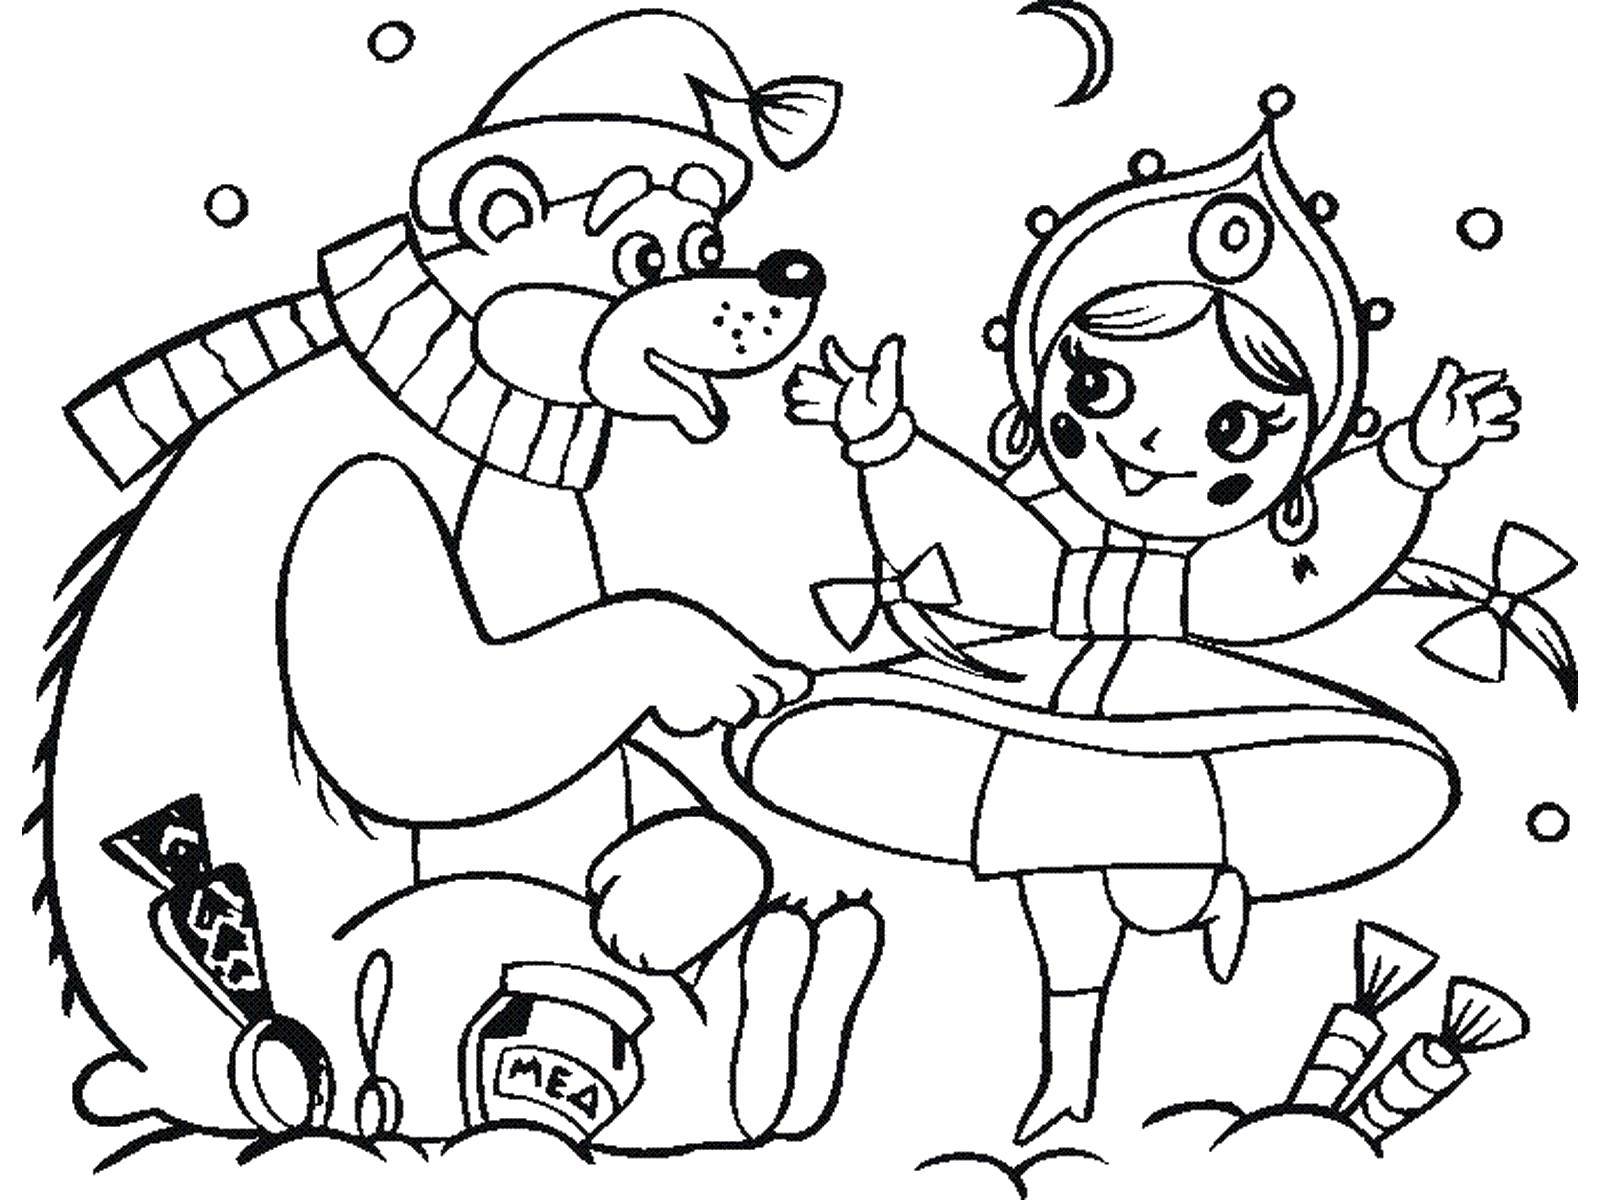 Coloring The snow maiden and the bear. Category maiden. Tags:  Snow maiden, winter, New Year, forest.